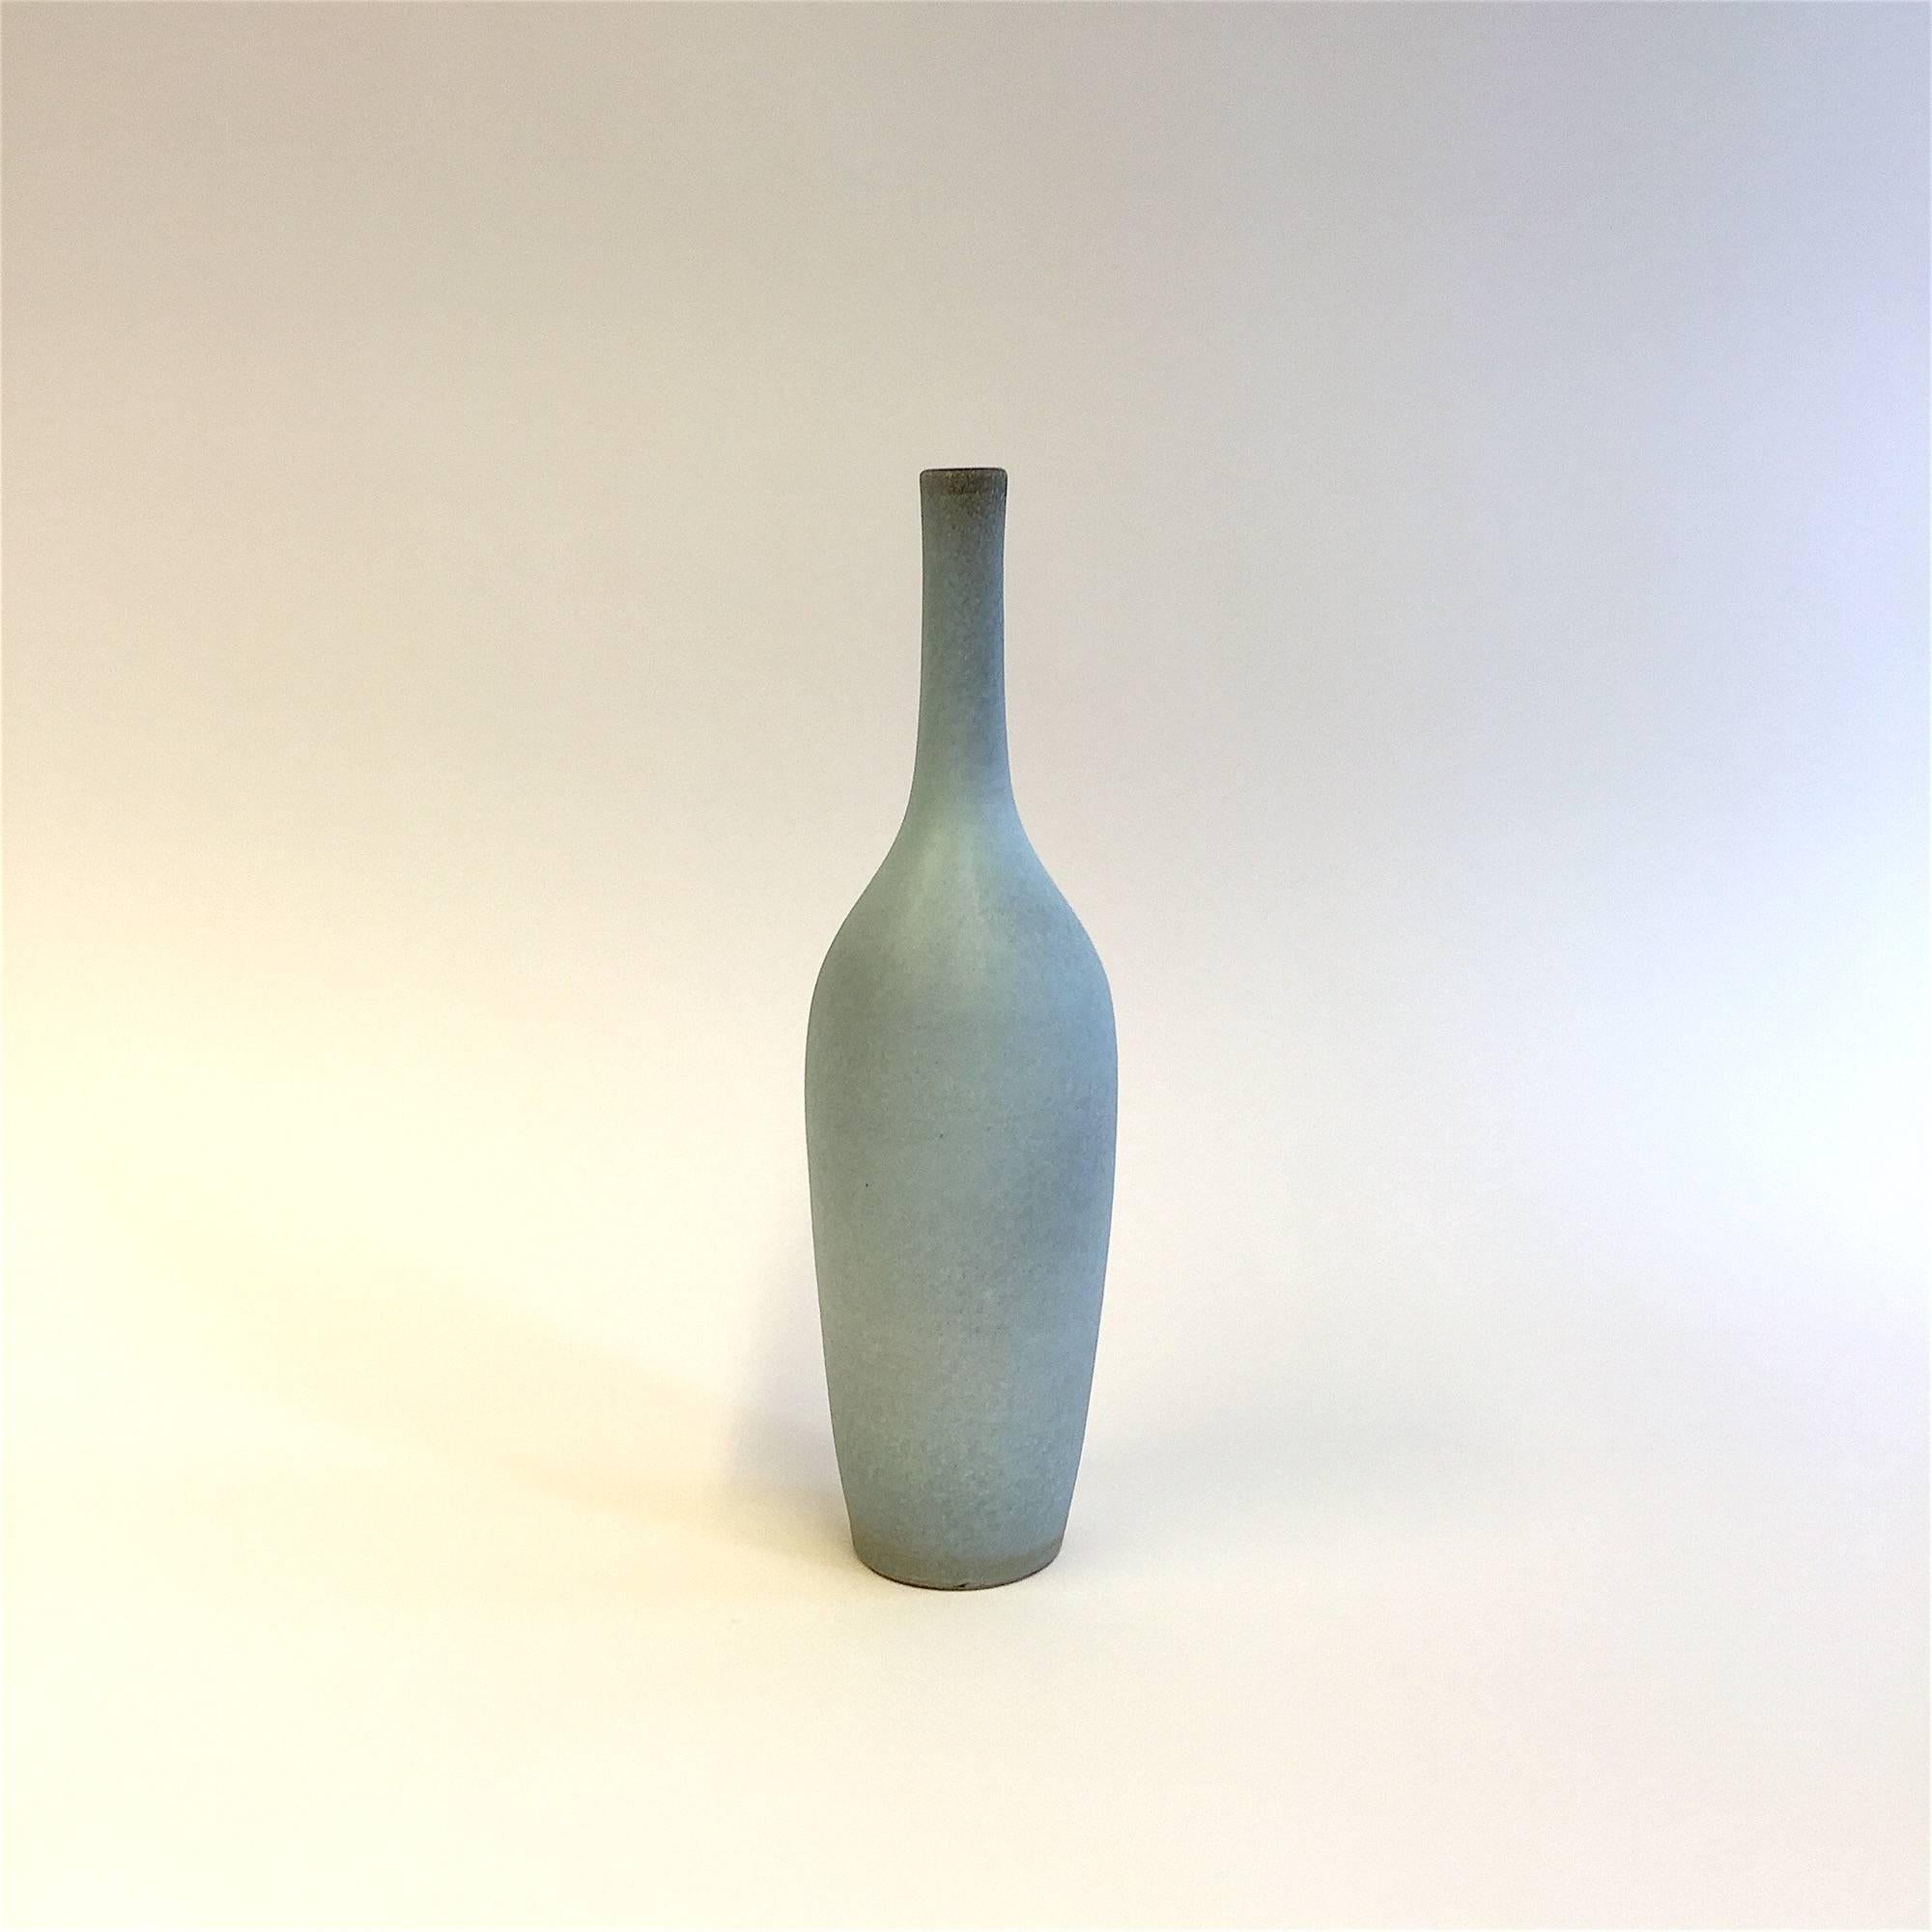 Suzanne Ramié ( 1907 - 1974)

Fantastic Ceramic vase by renowned France artist Suzanne Ramié having a light Blue glaze. Inside the top - yellow with green. Vallauris Clay. Incised on the bottom with the artist's 